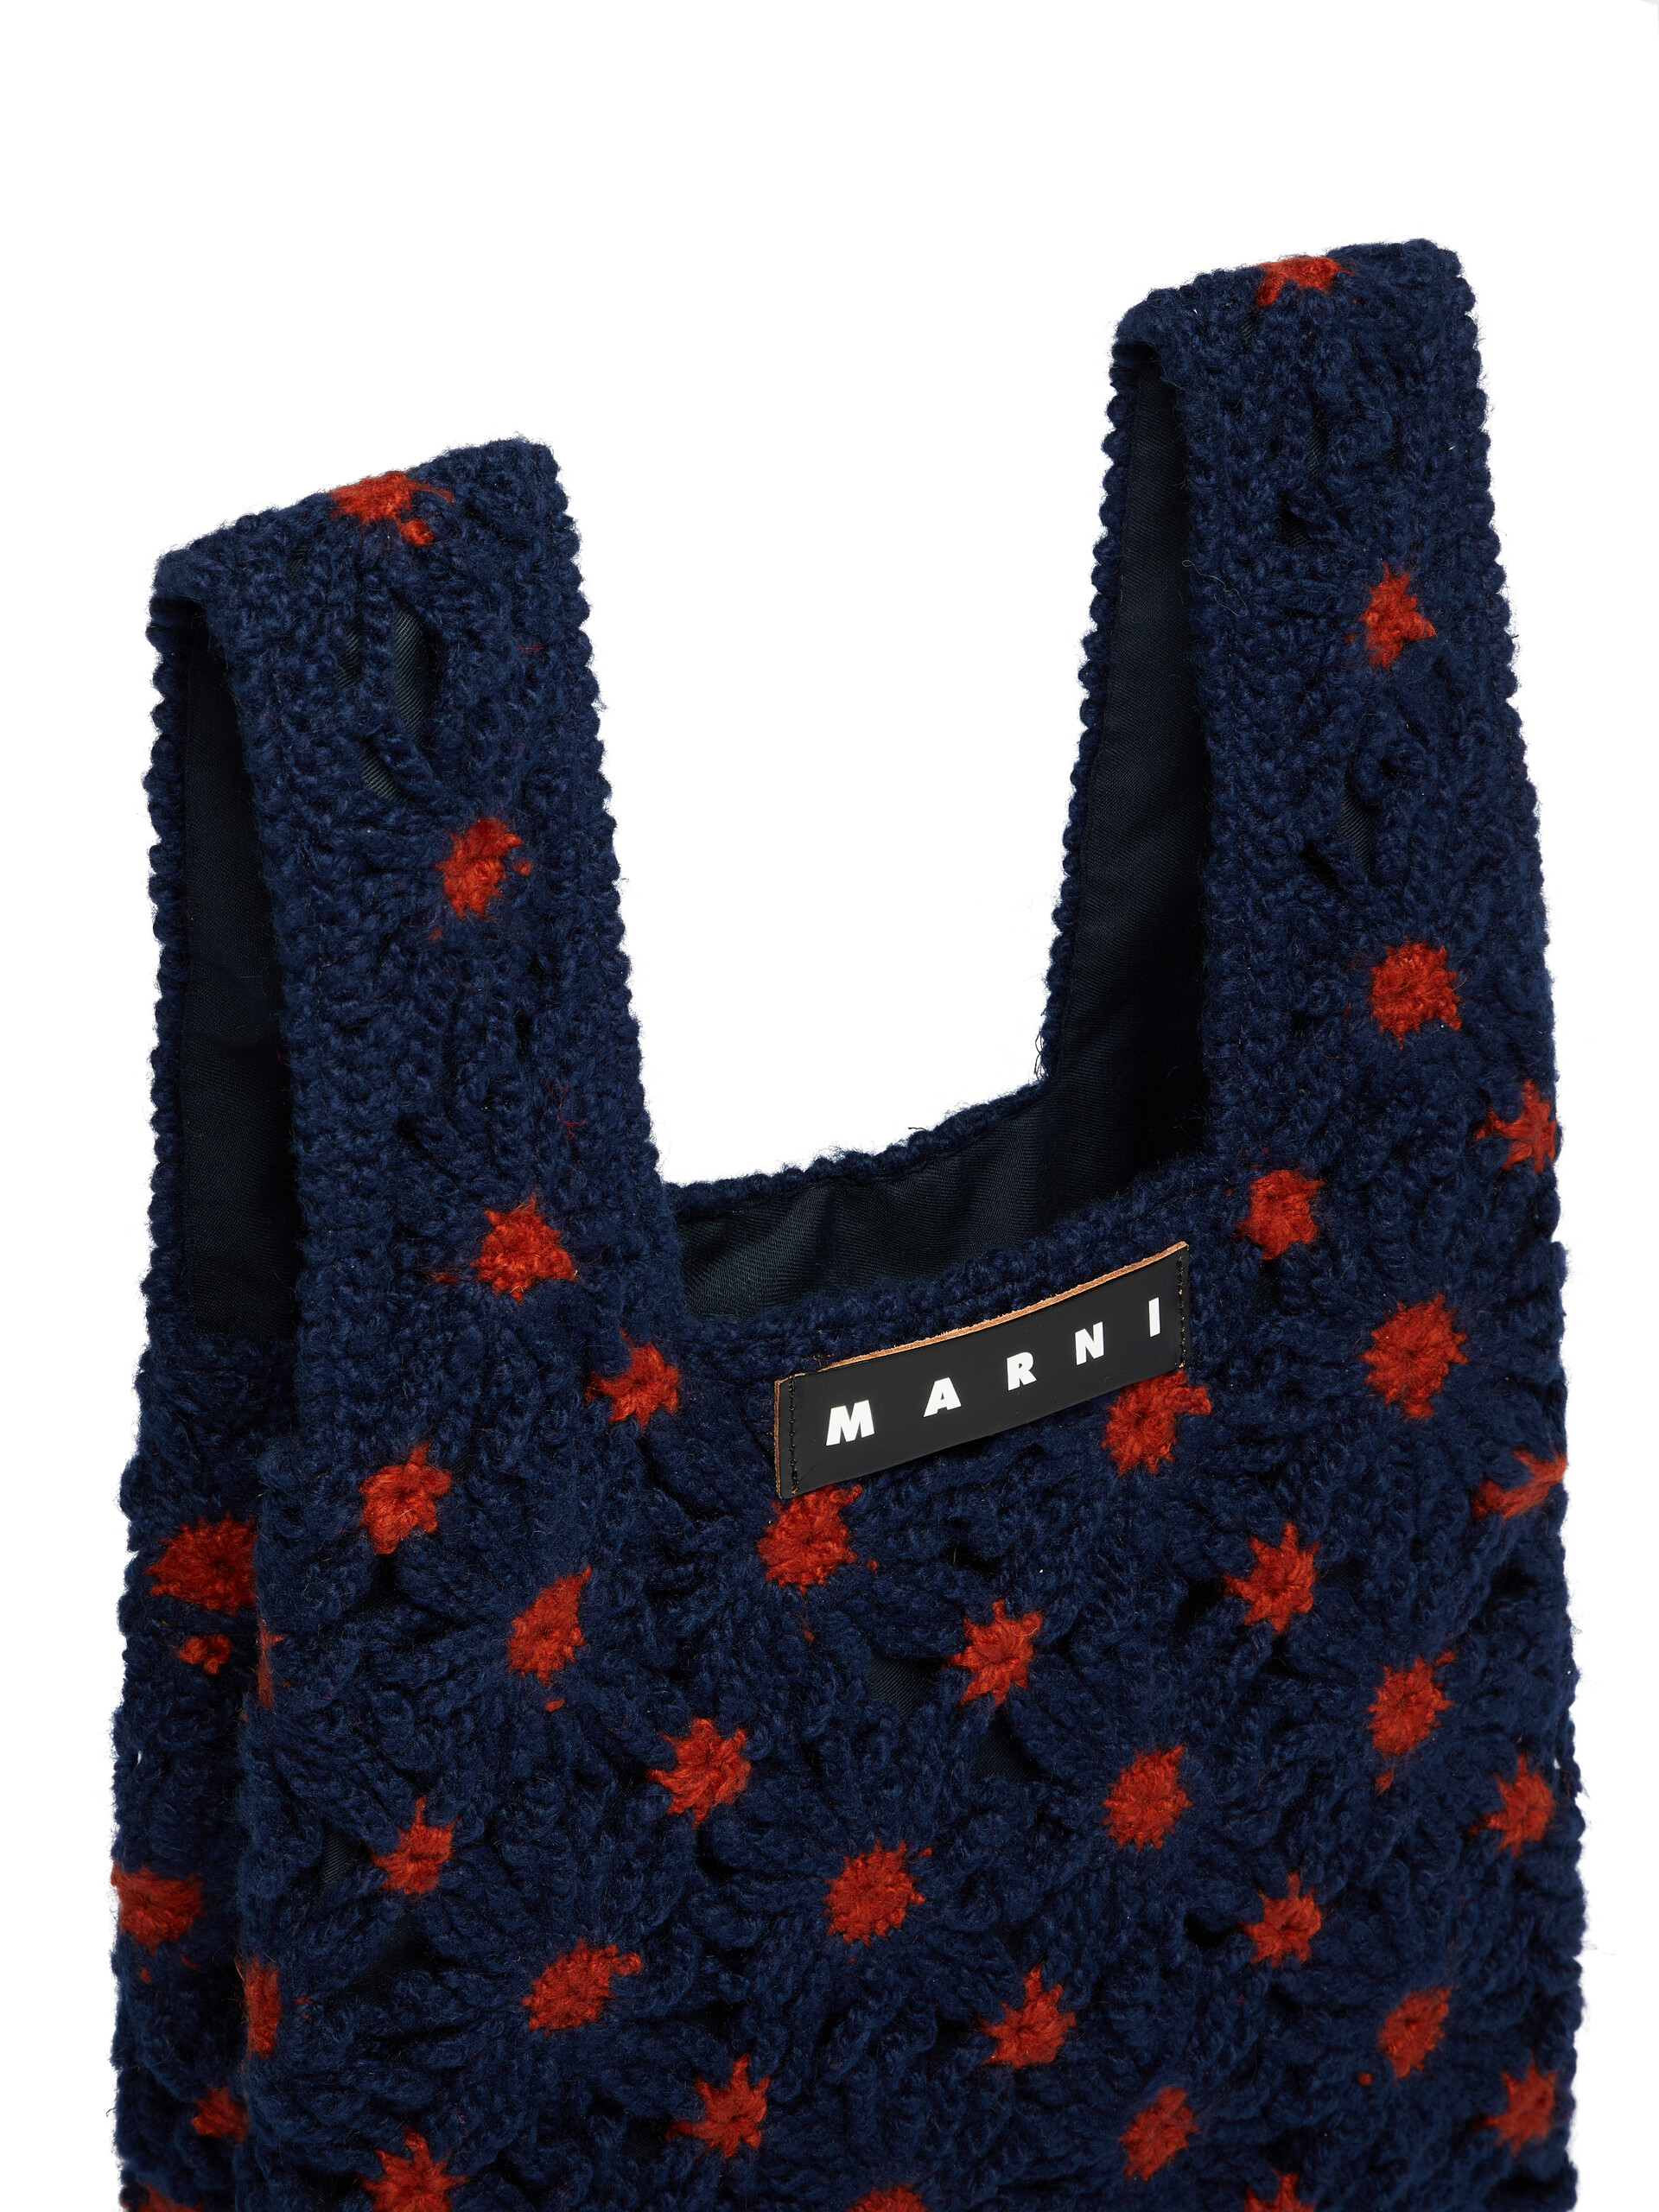 MARNI MARKET FISH bag in blue and red crochet - Shopping Bags - Image 4